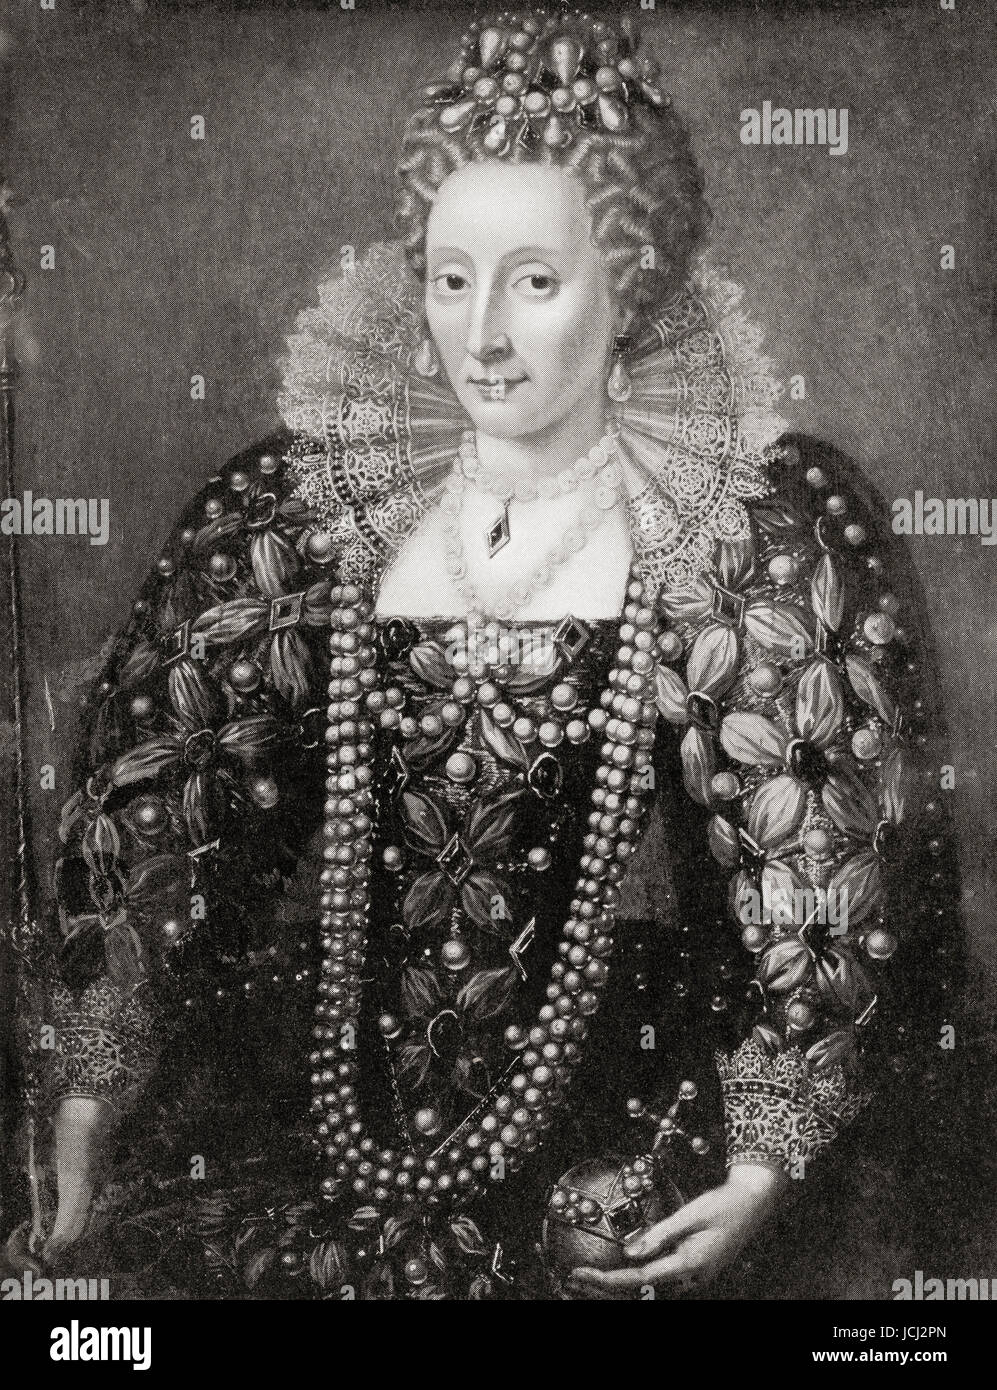 Elizabeth I, aka The Virgin Queen, Gloriana or Good Queen Bess, 1533 –  1603.  Queen of England and Ireland.  From Hutchinson's History of the Nations, published 1915. Stock Photo